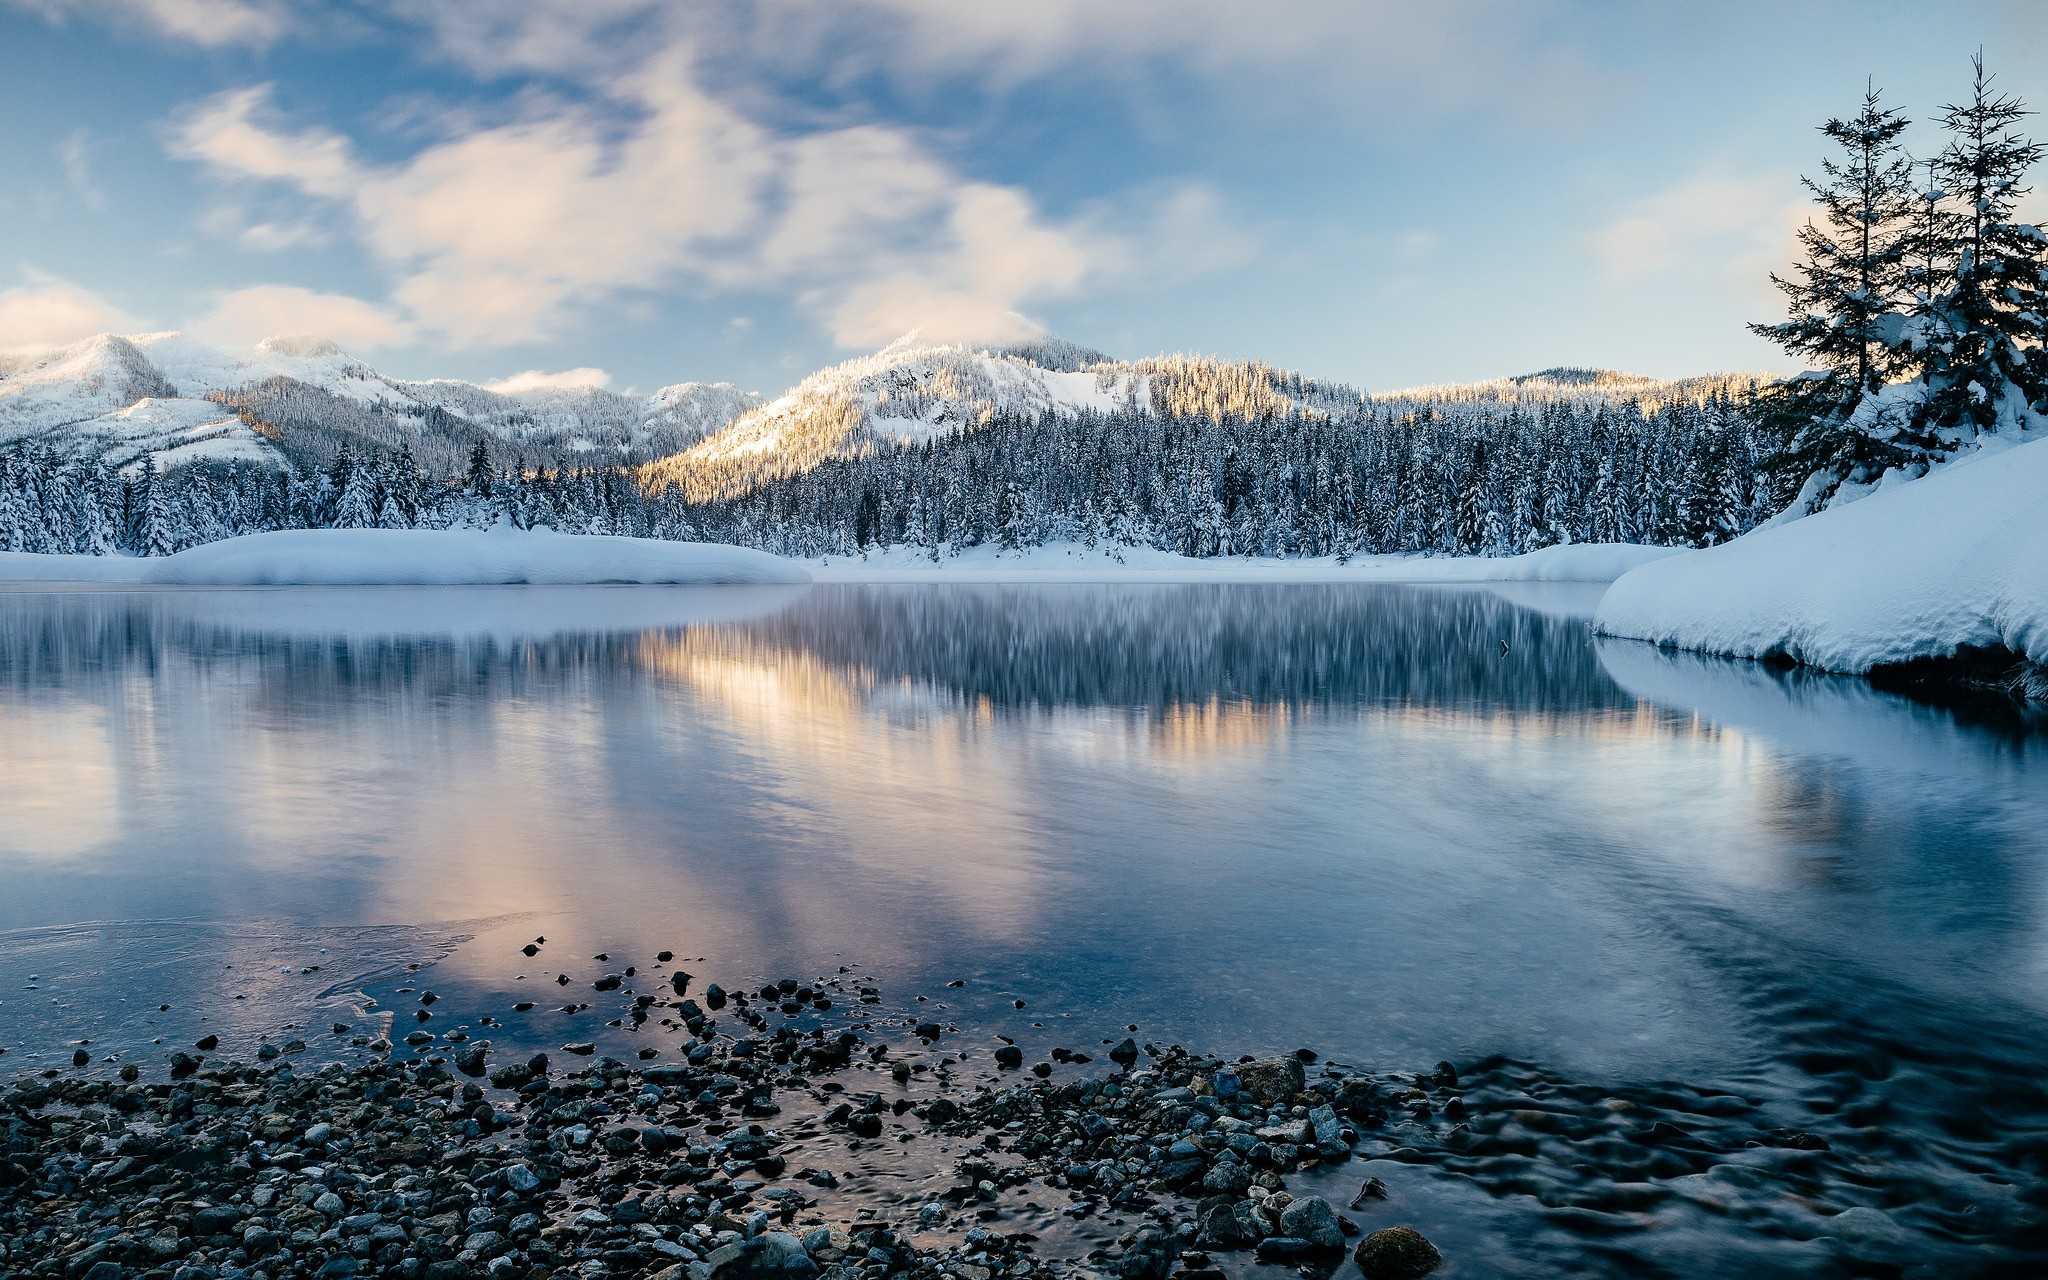 landscape, Photography, Nature, Lake, Mountains, Forest, Morning, Sunlight, Snow, Winter, Reflection, Washington state Wallpaper